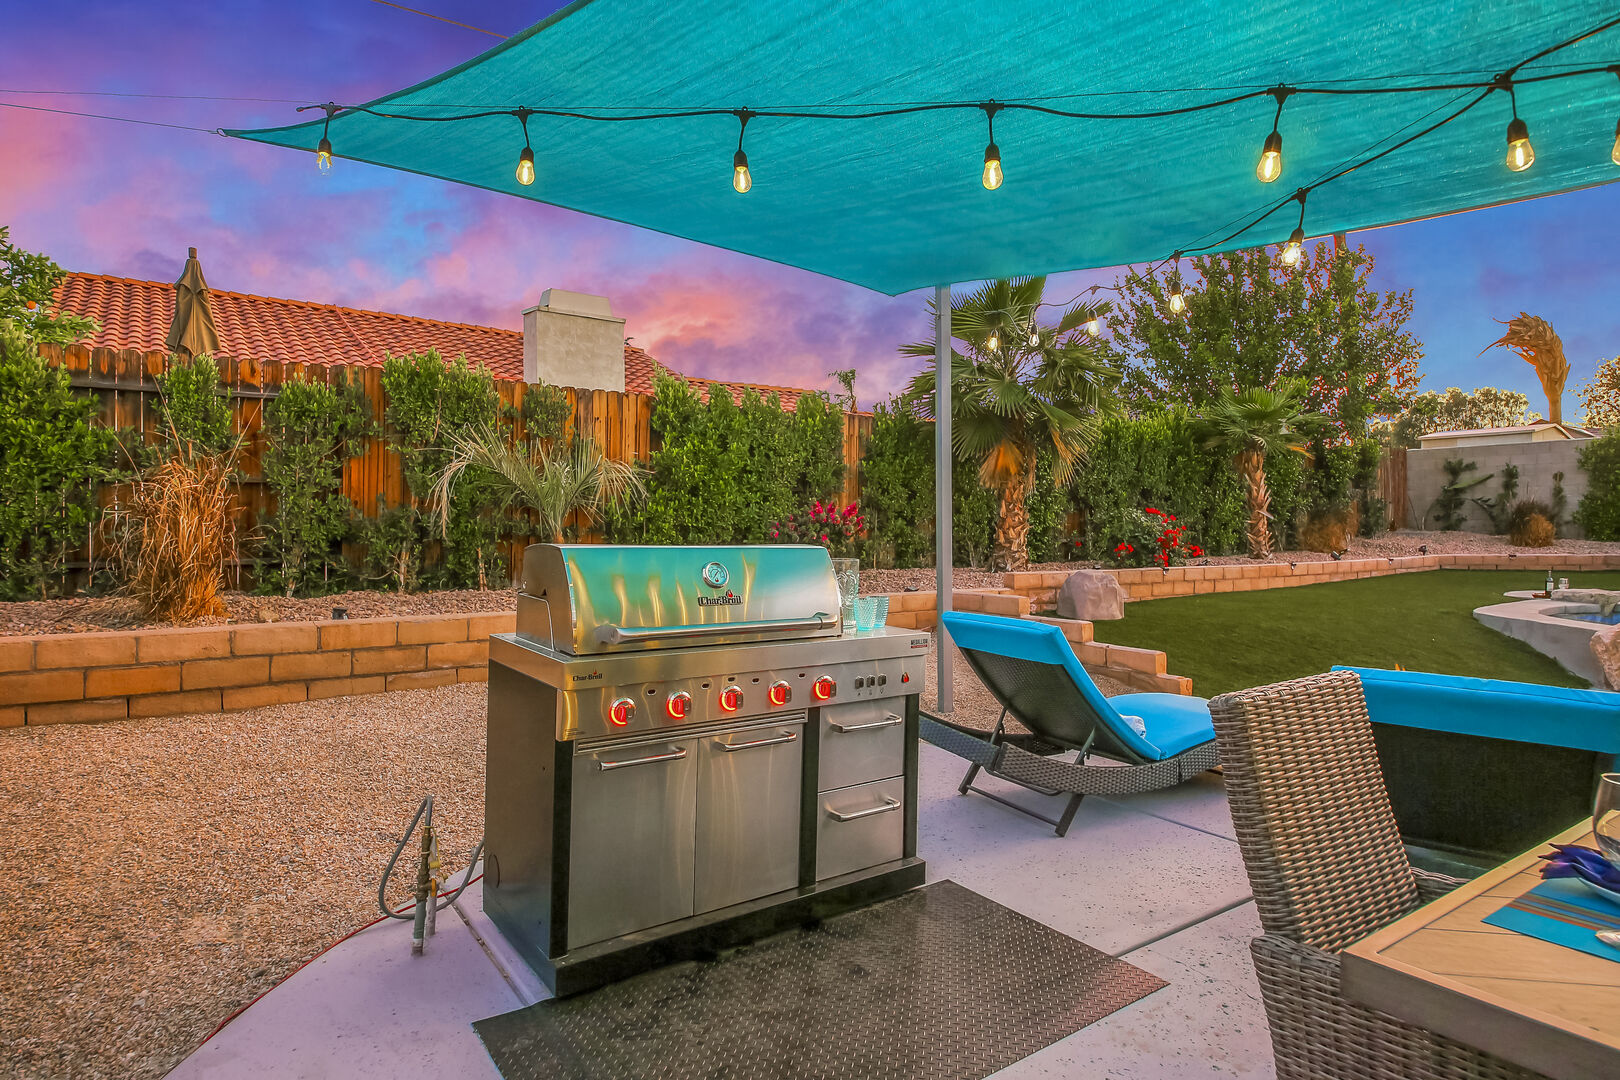 Your meals can be prepared on the natural gas barbecue.